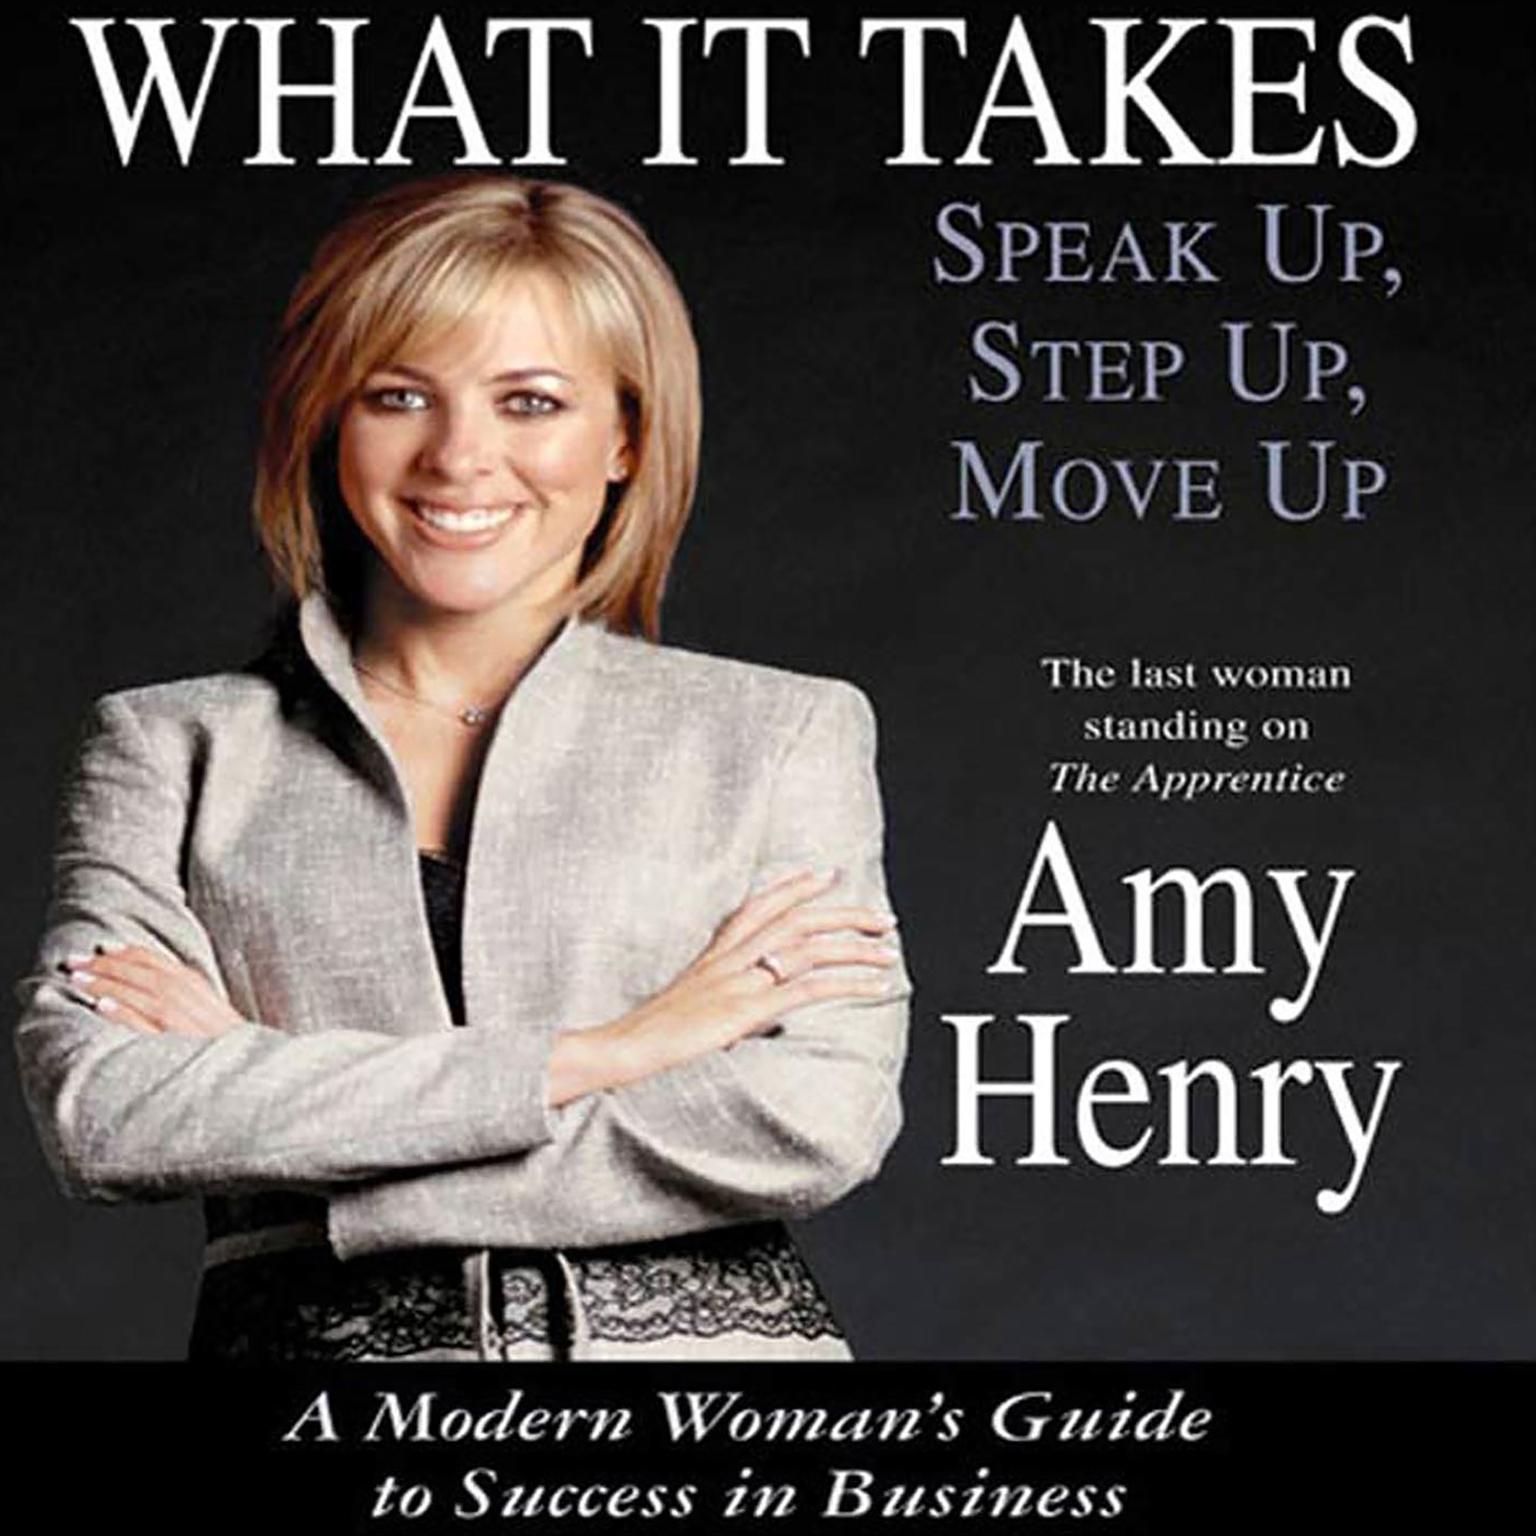 What It Takes: Speak Up, Step Up, Move Up (Abridged): A Modern Womans Guide to Success in Business Audiobook, by Amy Henry